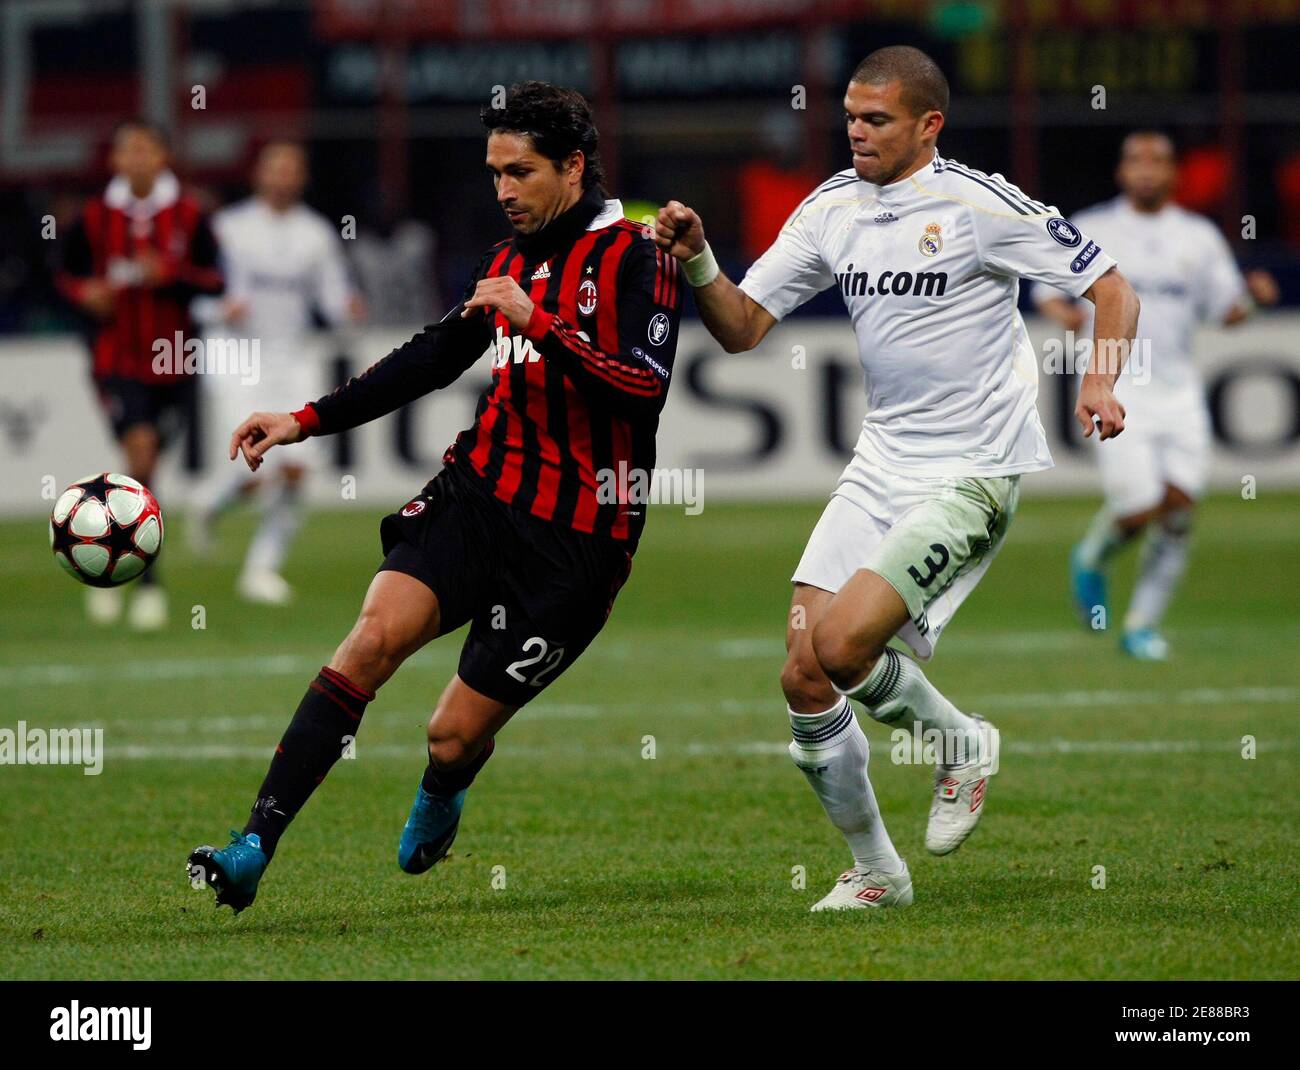 AC Milan's Marco Borriello (L) challenges Pepe of Real Madrid during their  Champions League soccer match at the San Siro stddium in Milan November 3,  2009. REUTERS/Alessandro Bianchi (ITALY SPORT SOCCER Stock